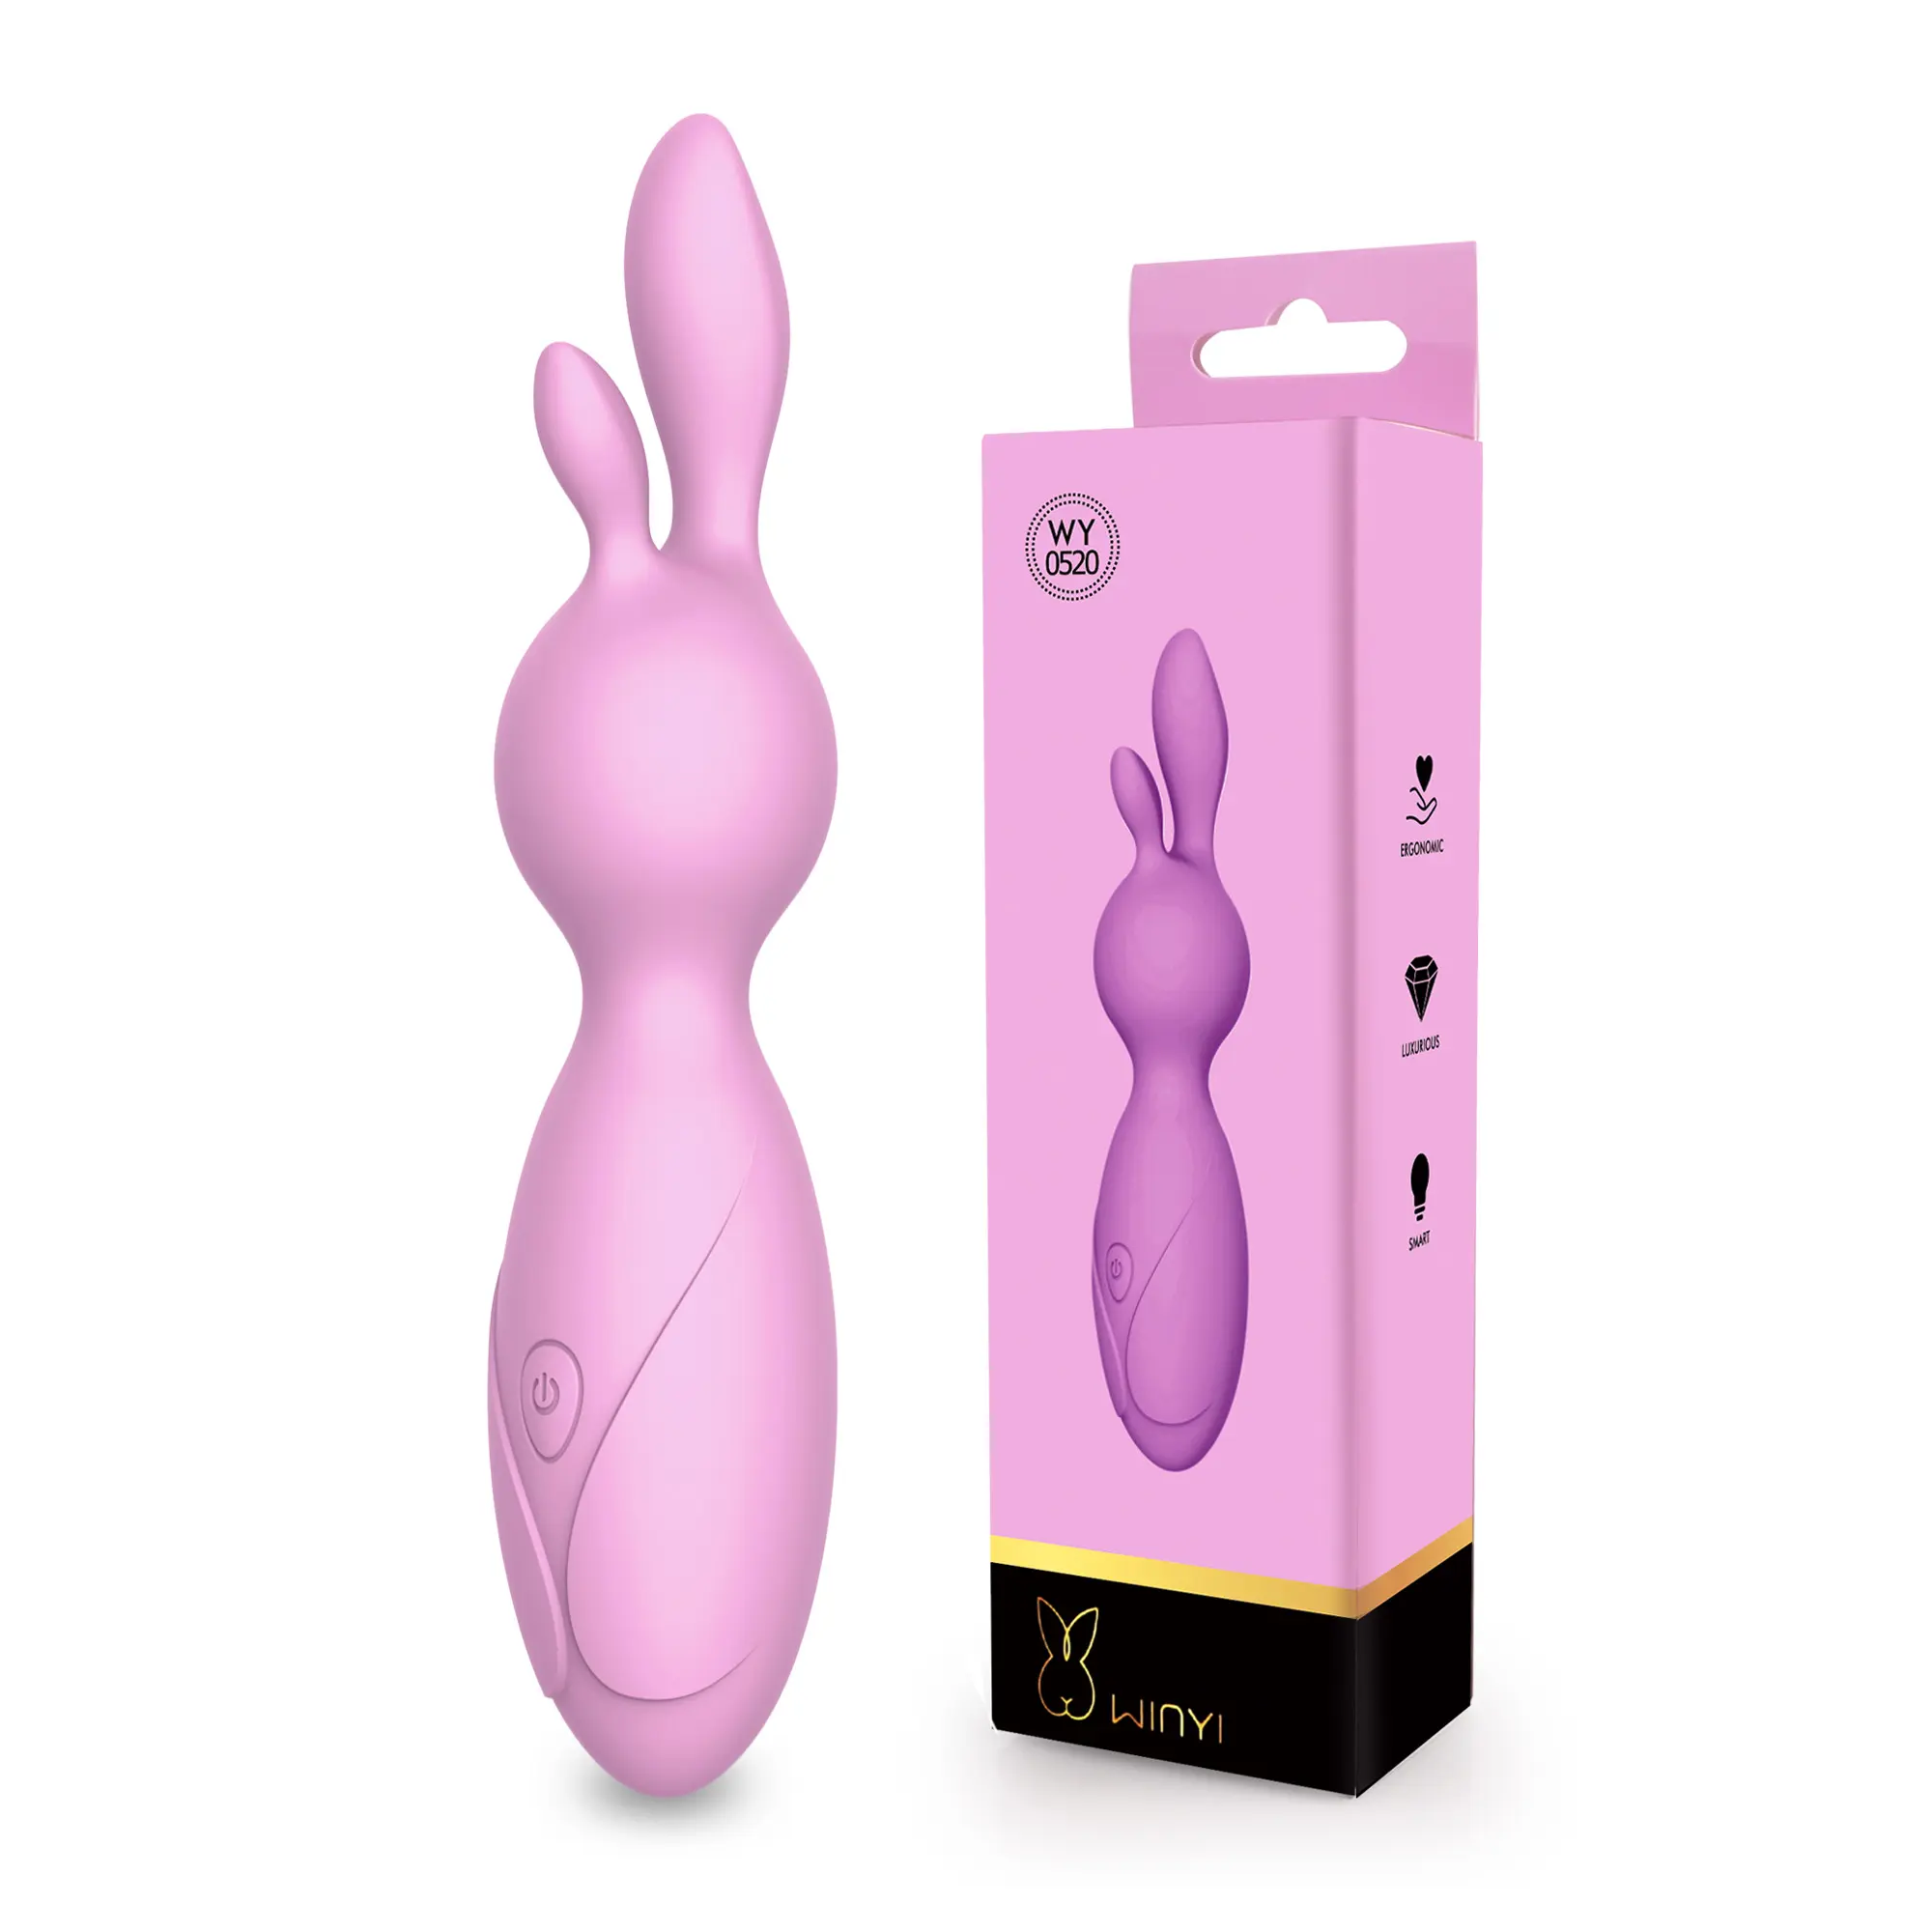 New Design Japan Female IPX5 Waterproof Adult Sex Toys Women Using Sex Silicon Rabbit Vibrator In Sex Product